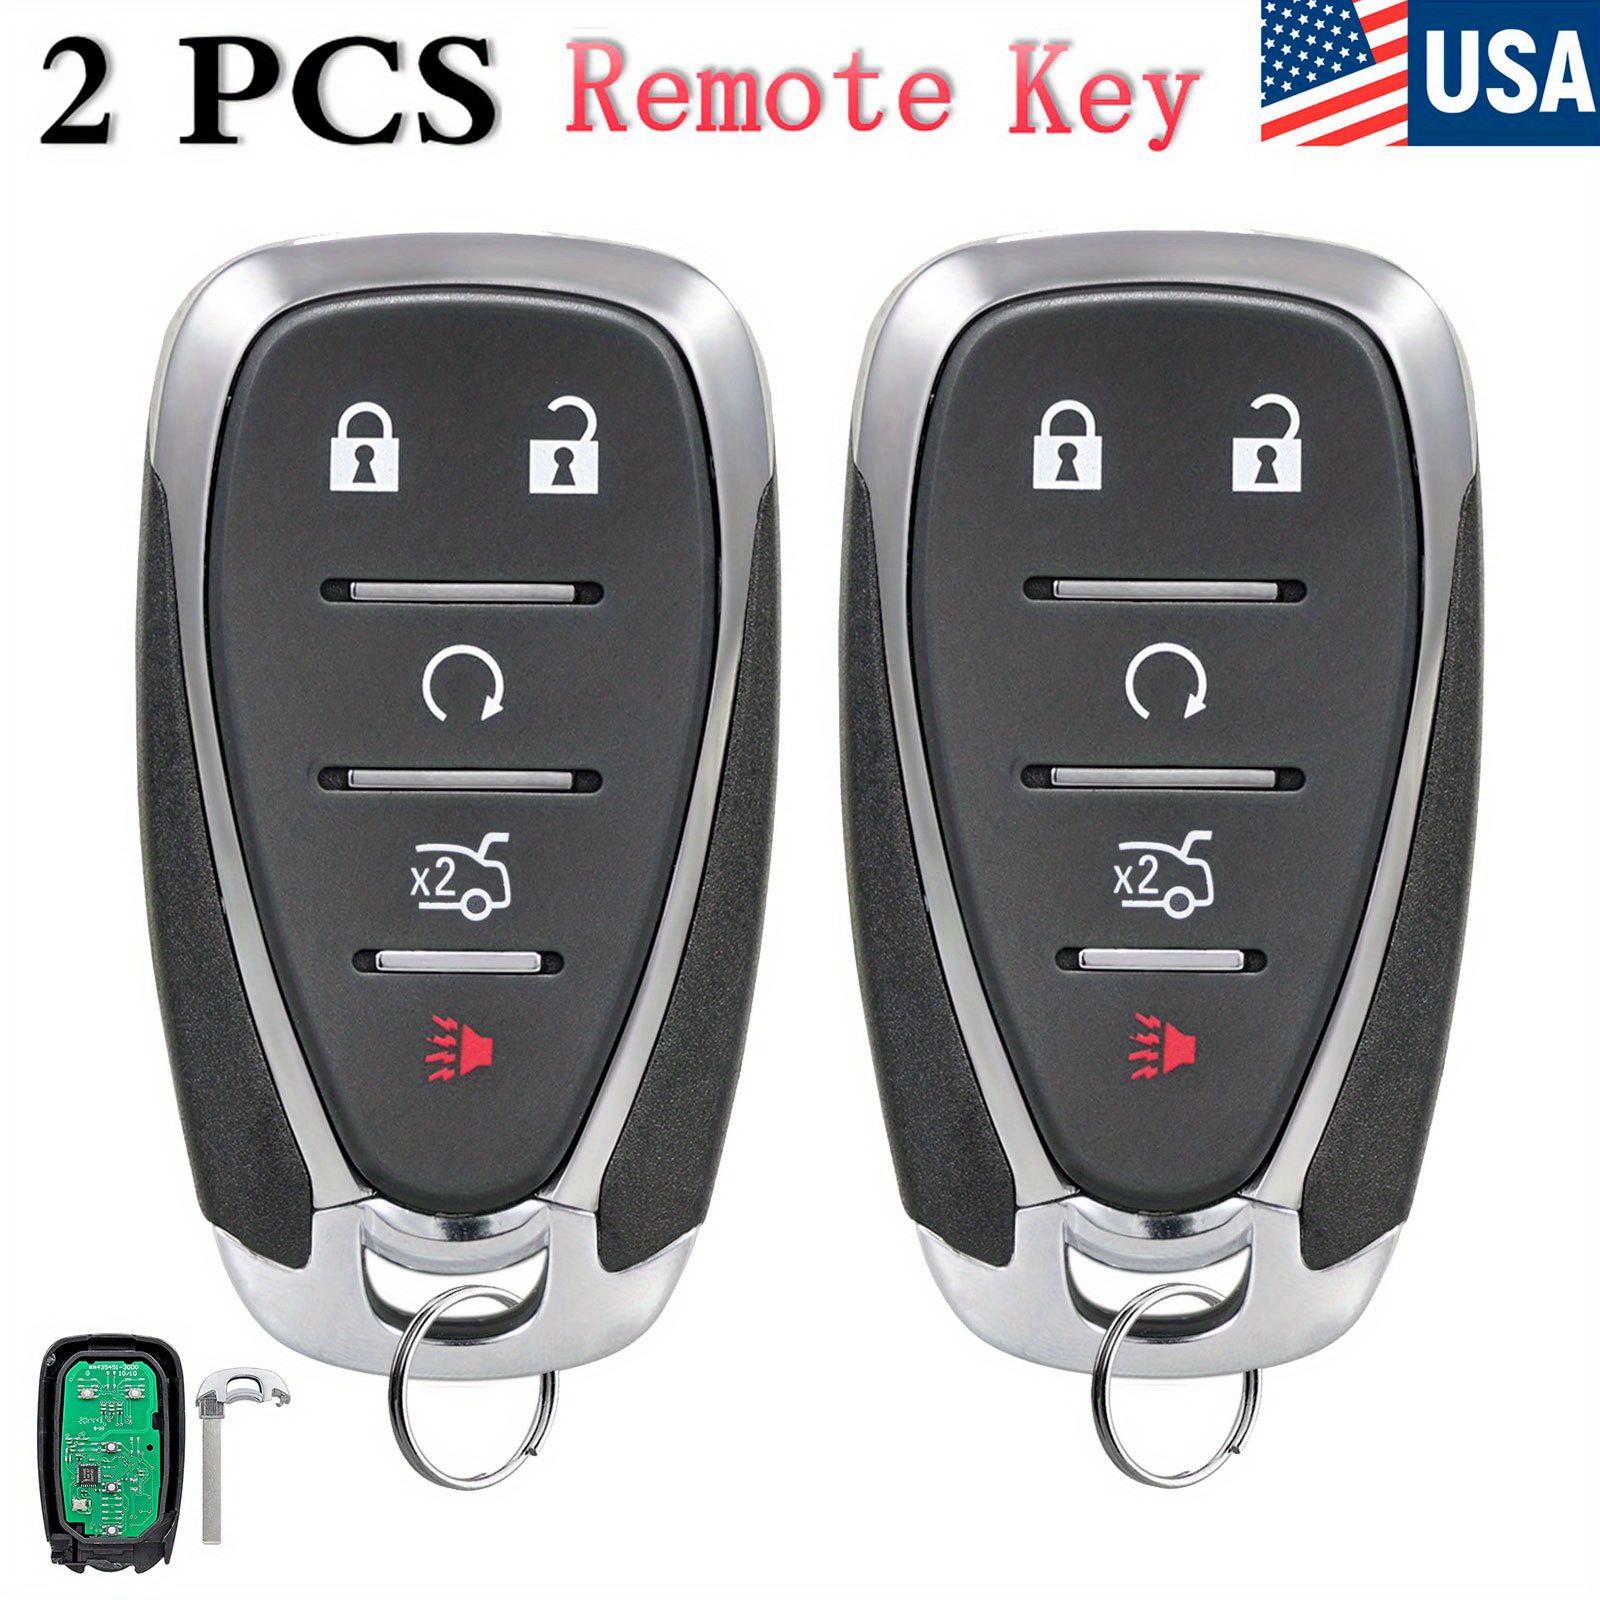 

2pcs 433mhz Remote Car Key Fob 5 Buttons For For For Cruze For Malibu Fit Fcc Id Hyq4ea